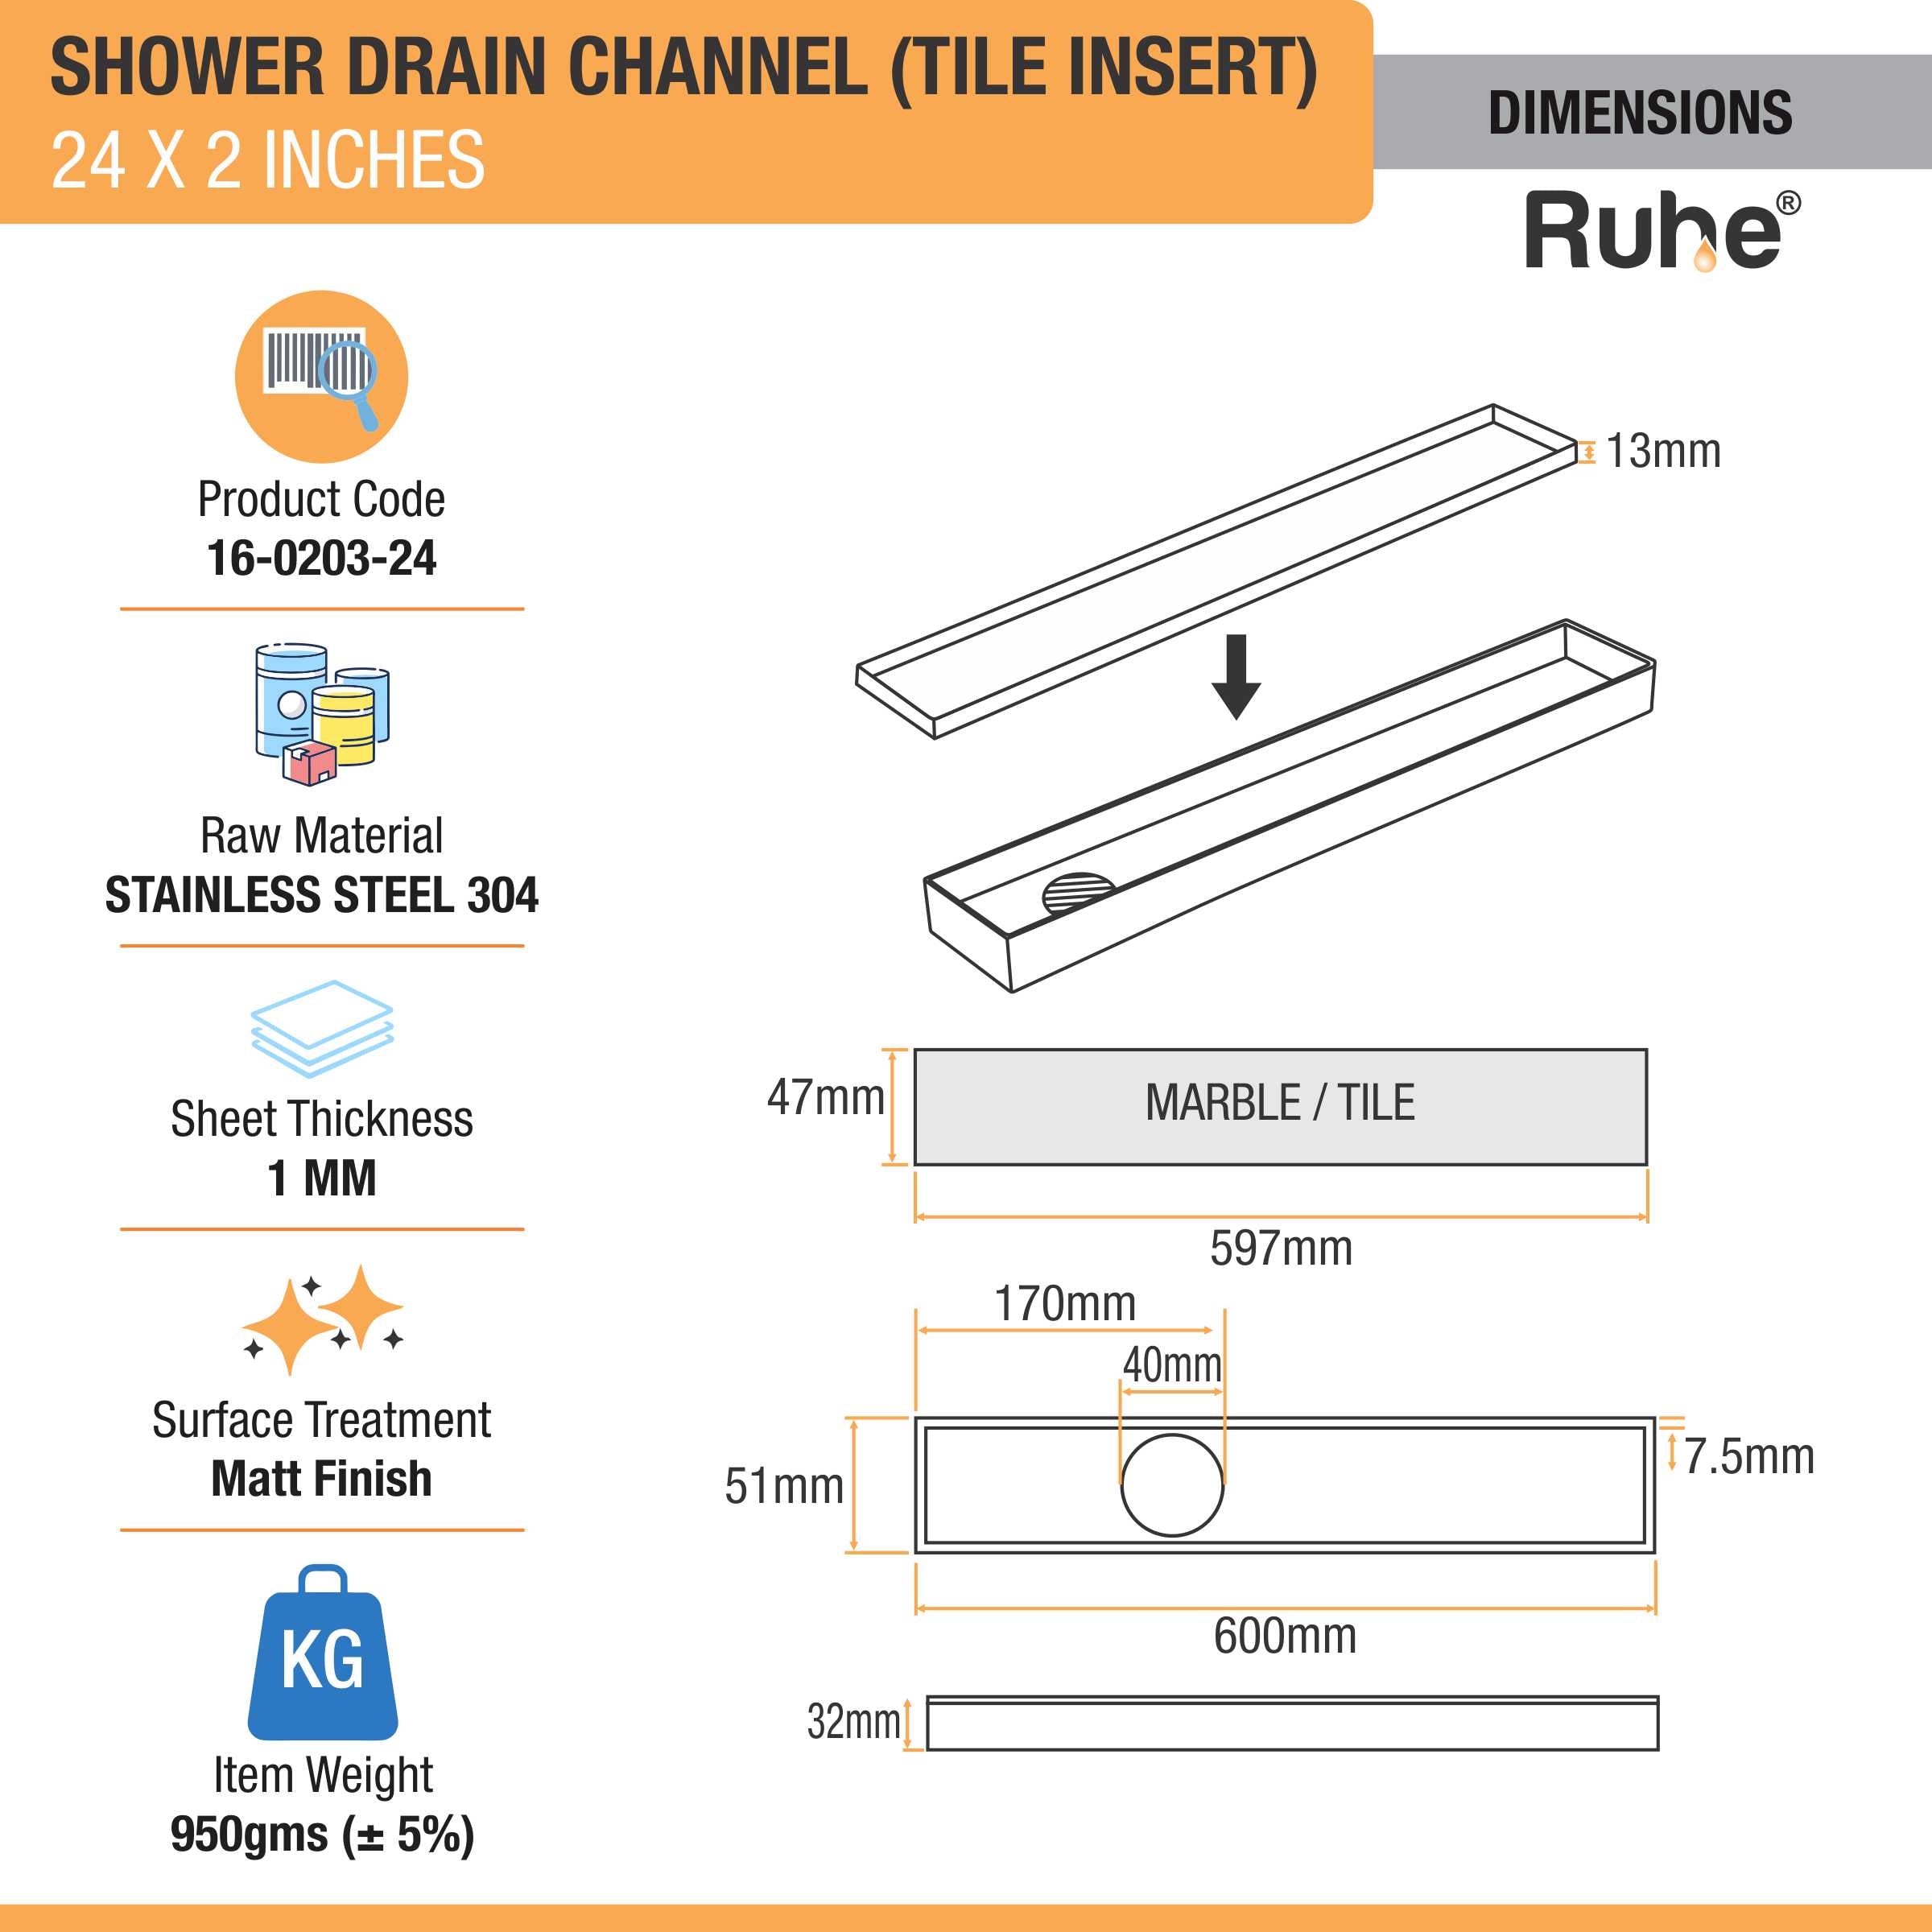 Tile Insert Shower Drain Channel (24 x 2 Inches) (304 Grade) dimensions and size